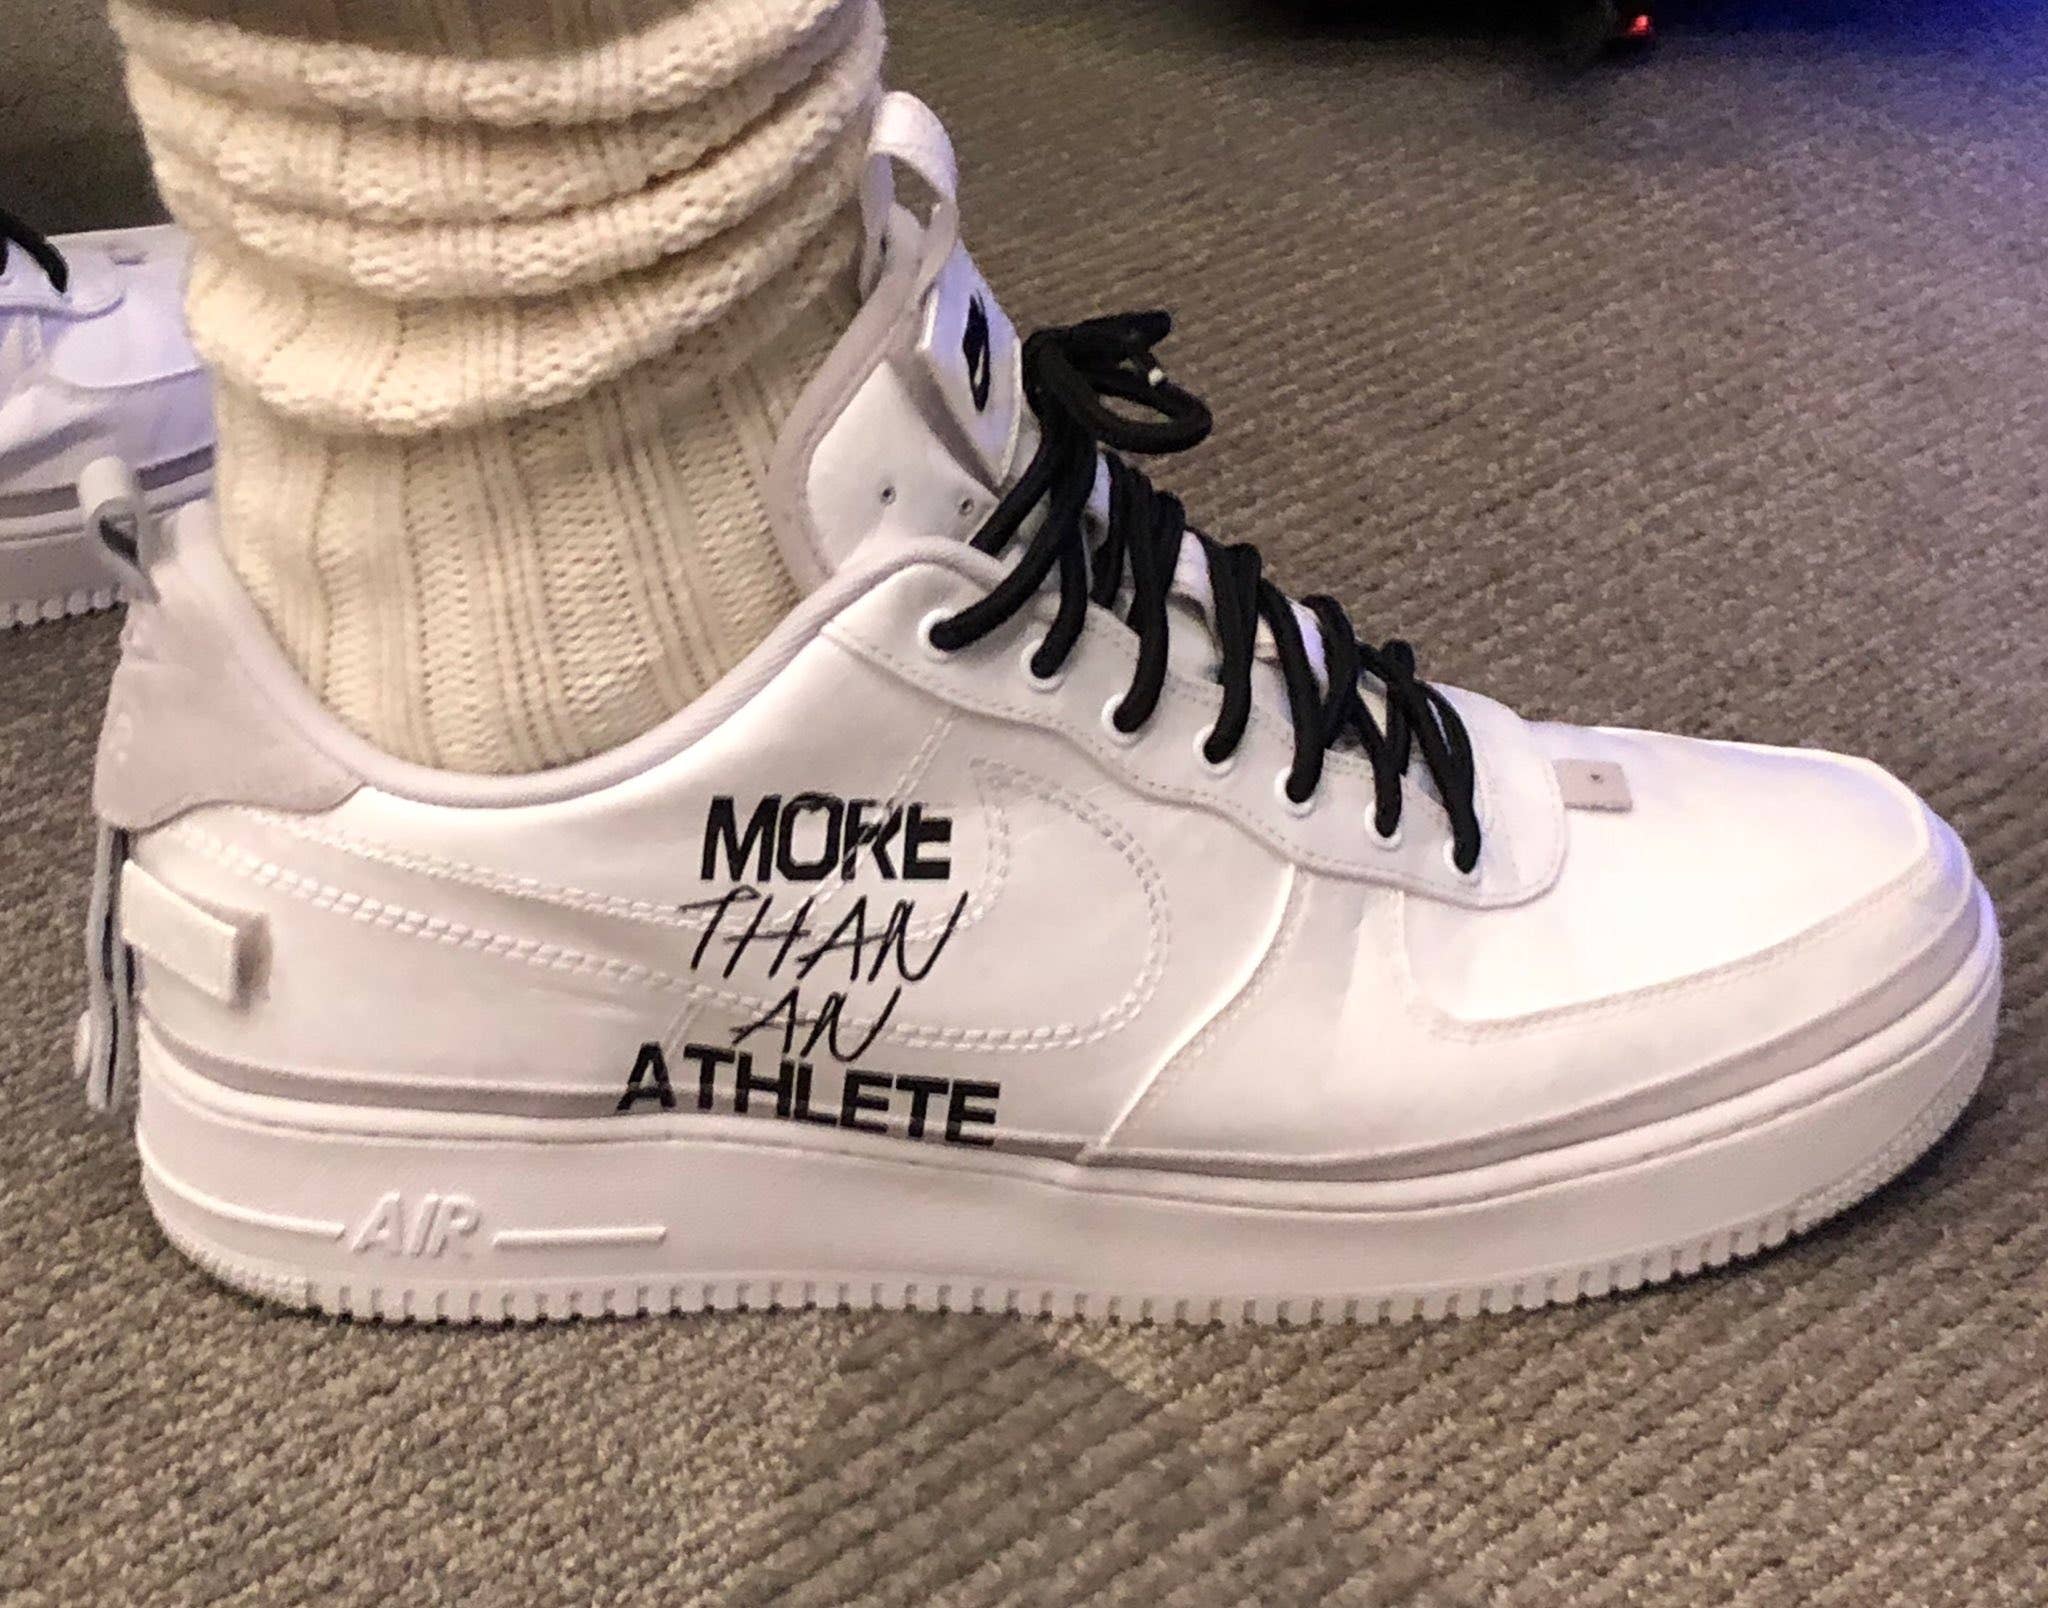 LeBron James Nike Air Force 1 Low More Than An Athlete